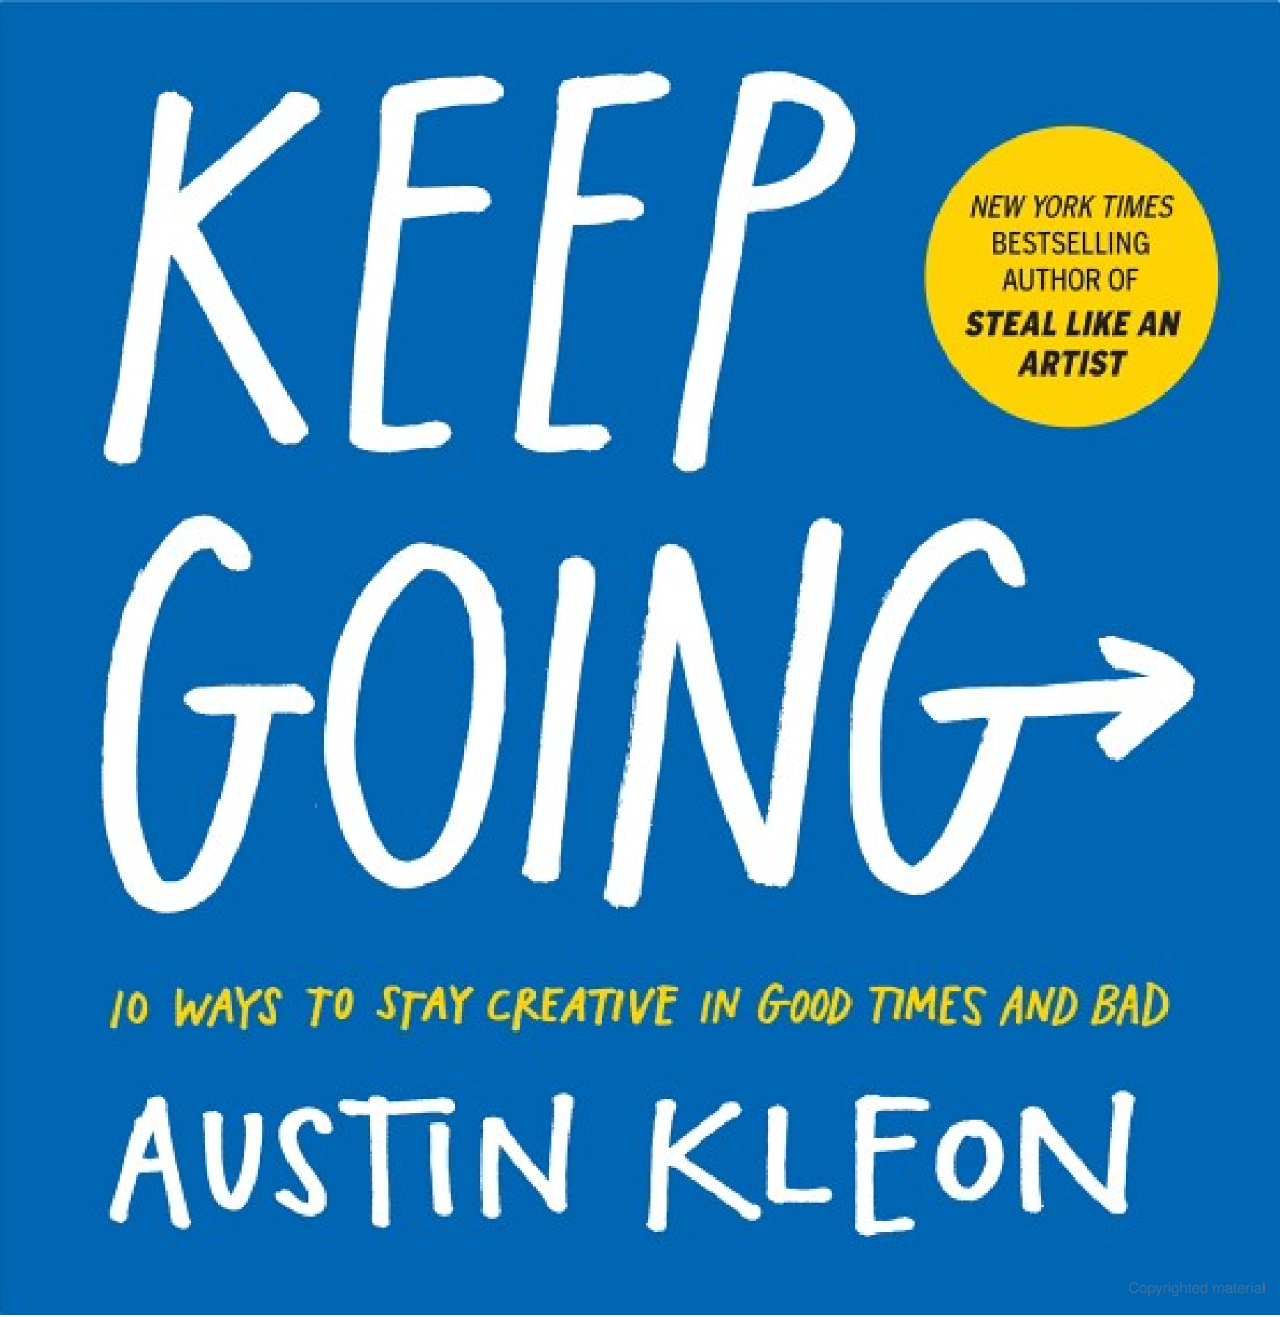 Keep Going: 10 Ways to Stay Creative in Good Times and Bad
Book by Austin Kleon